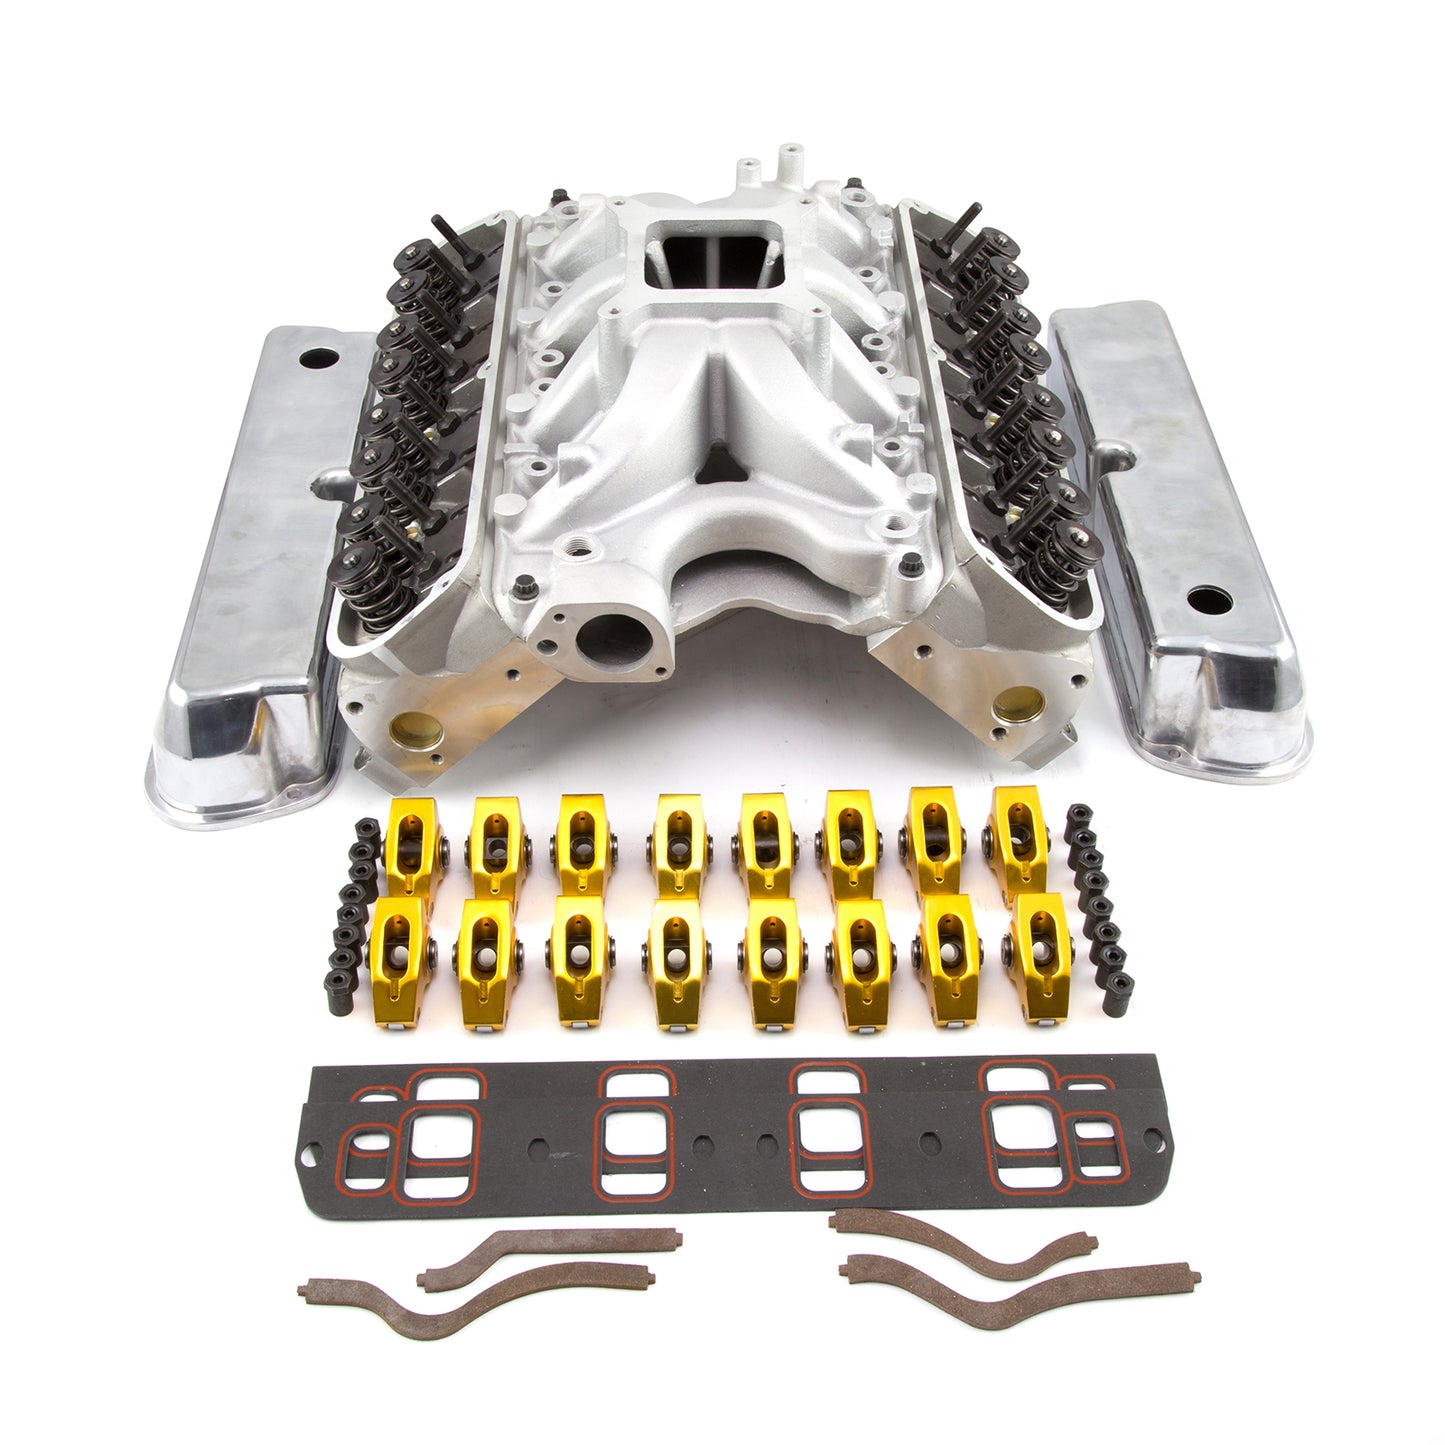 Speedmaster PCE435.1035 Fits Ford 351W Windsor Solid FT 210cc Cylinder Head Top End Engine Combo Kit